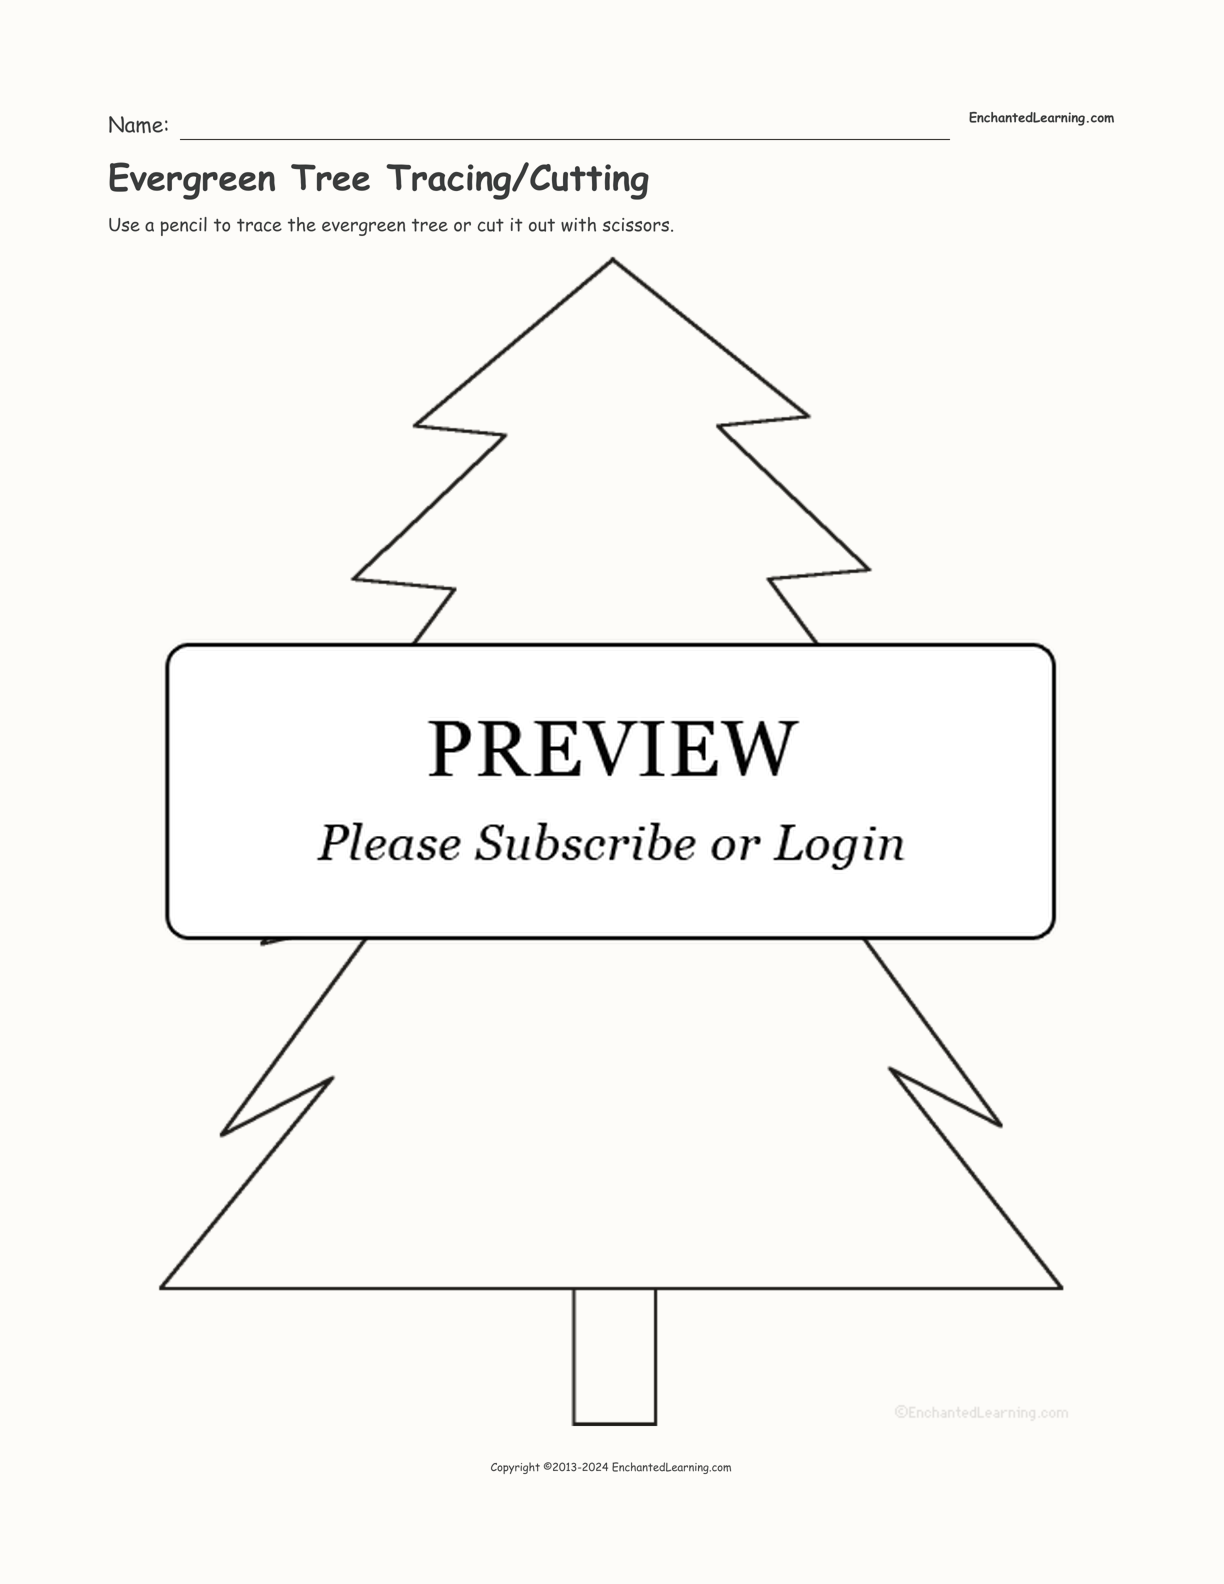 Evergreen Tree Tracing/Cutting interactive printout page 1